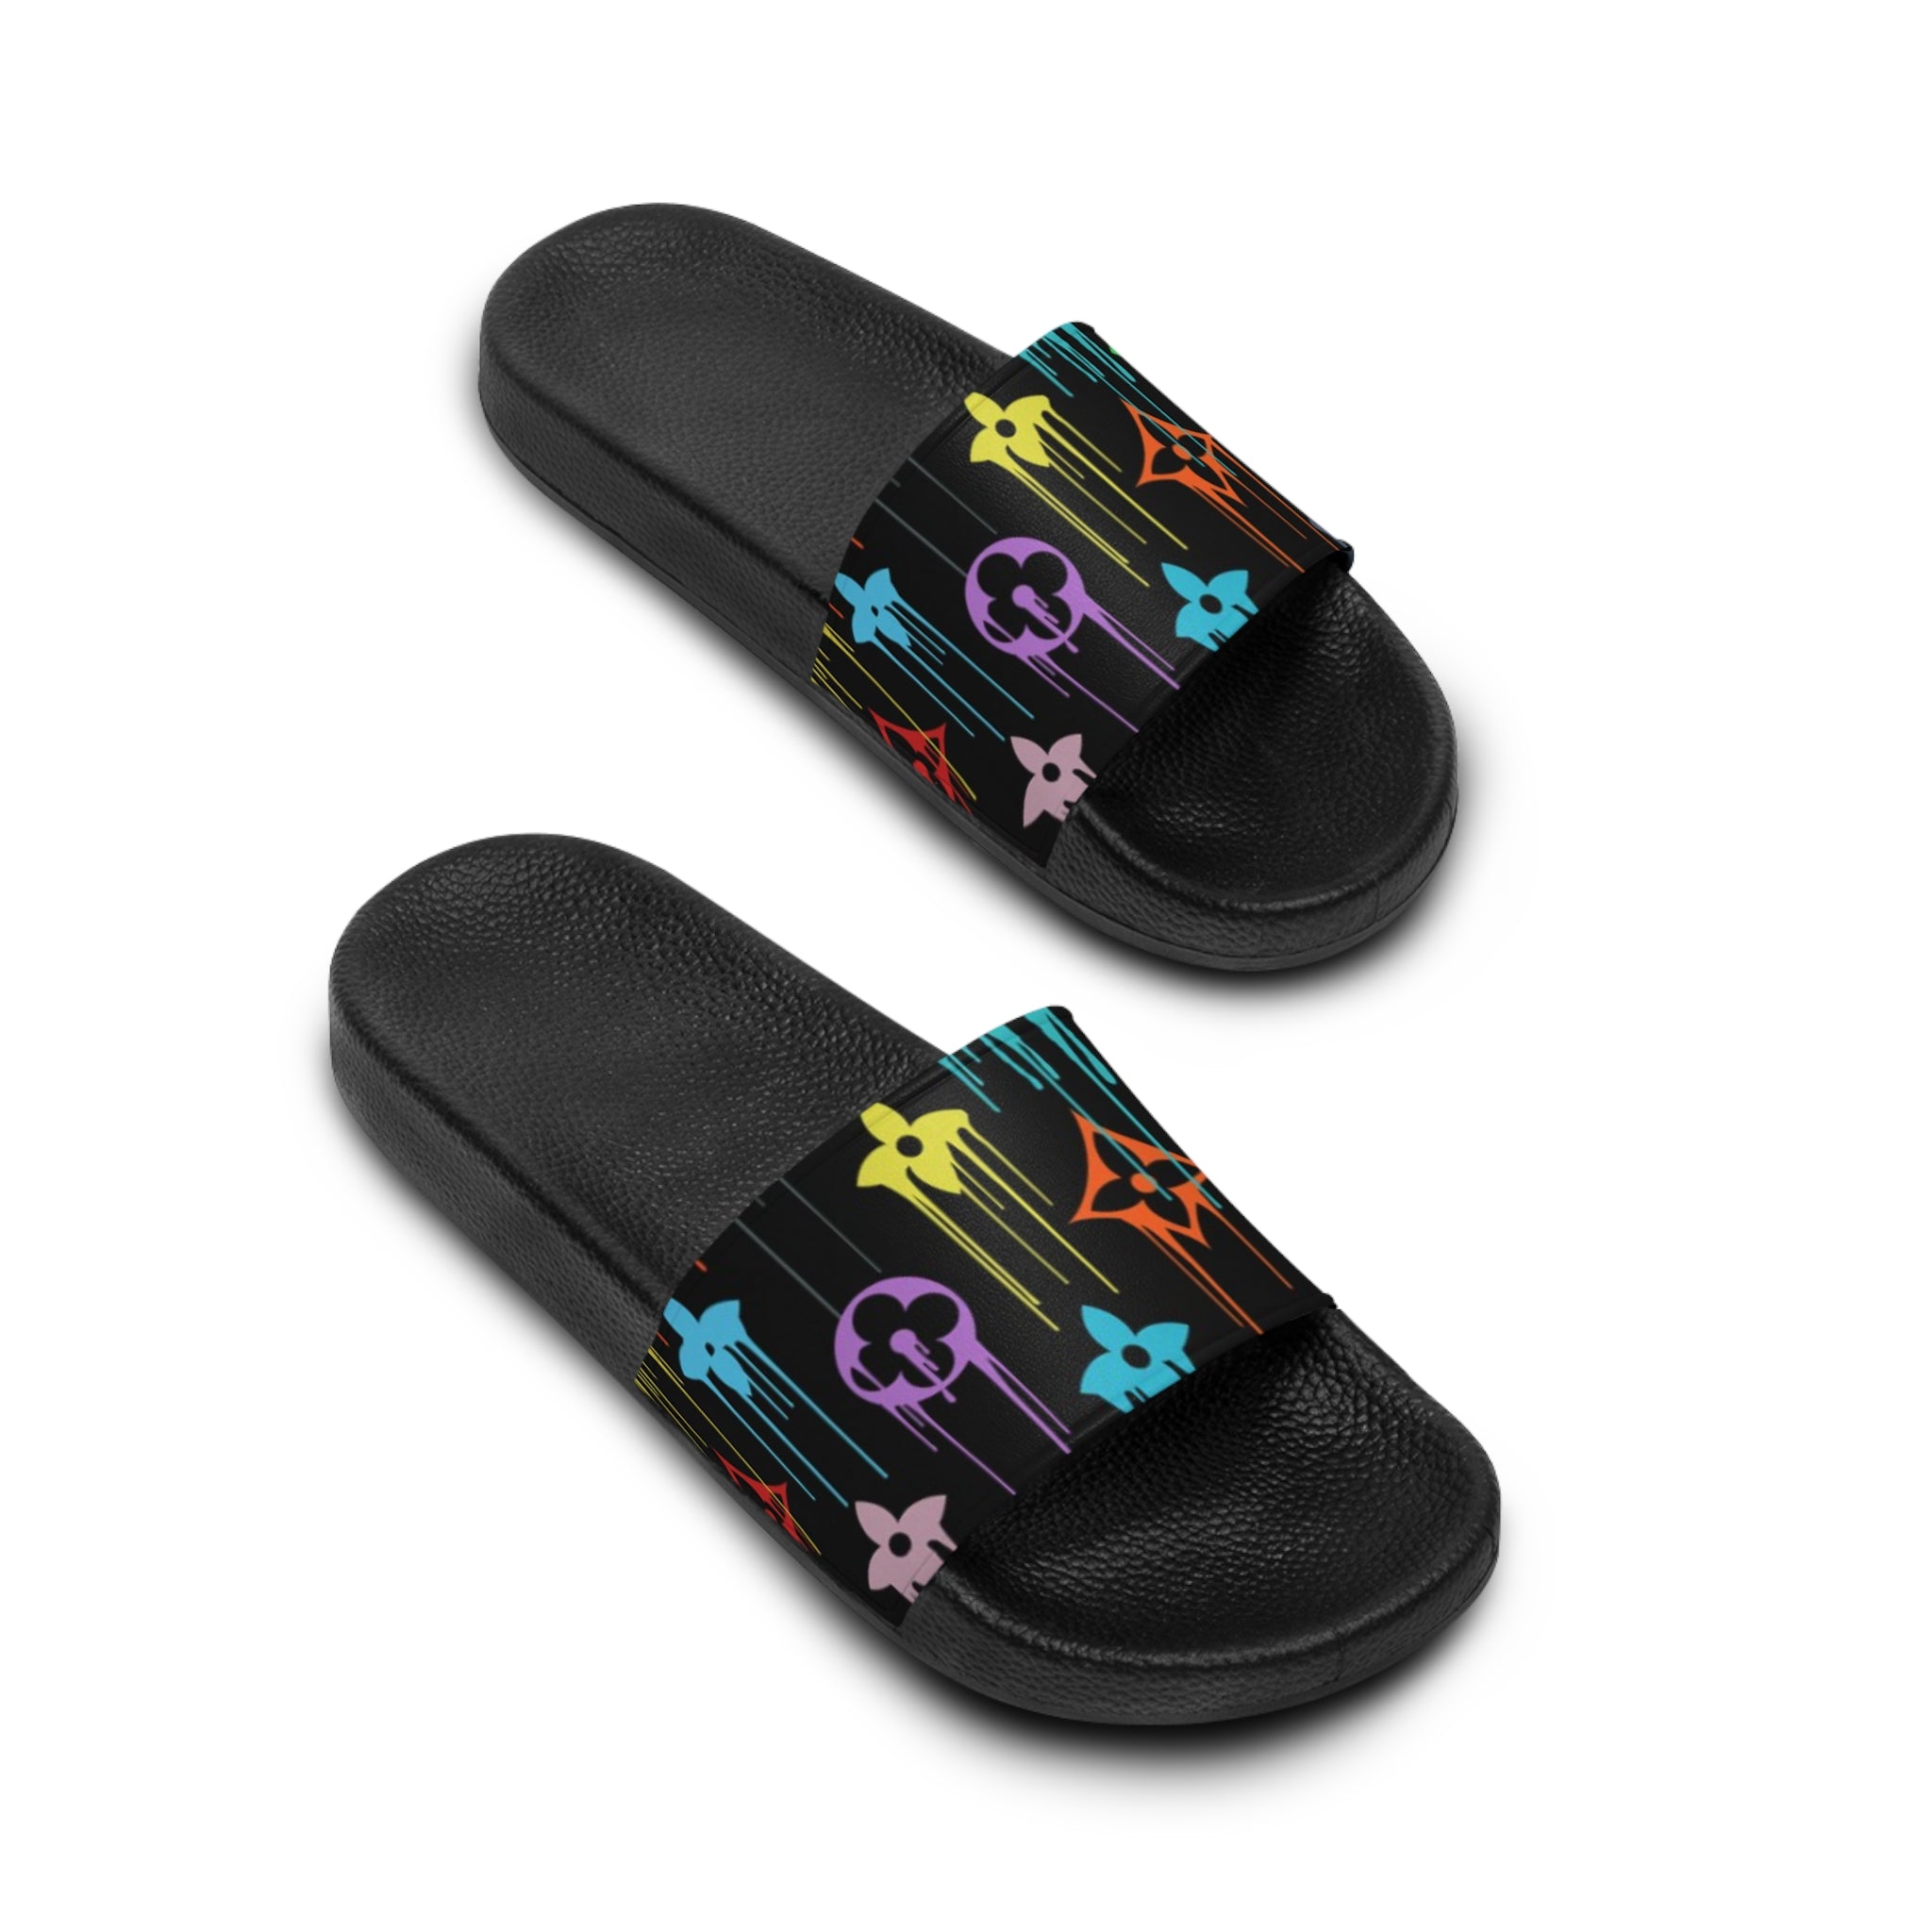  Casual Wear Collection in Multi-Color Dripping Icons Women's Slide Sandals, Slide Sandals for Women, Plaid Slip Ons Sandals